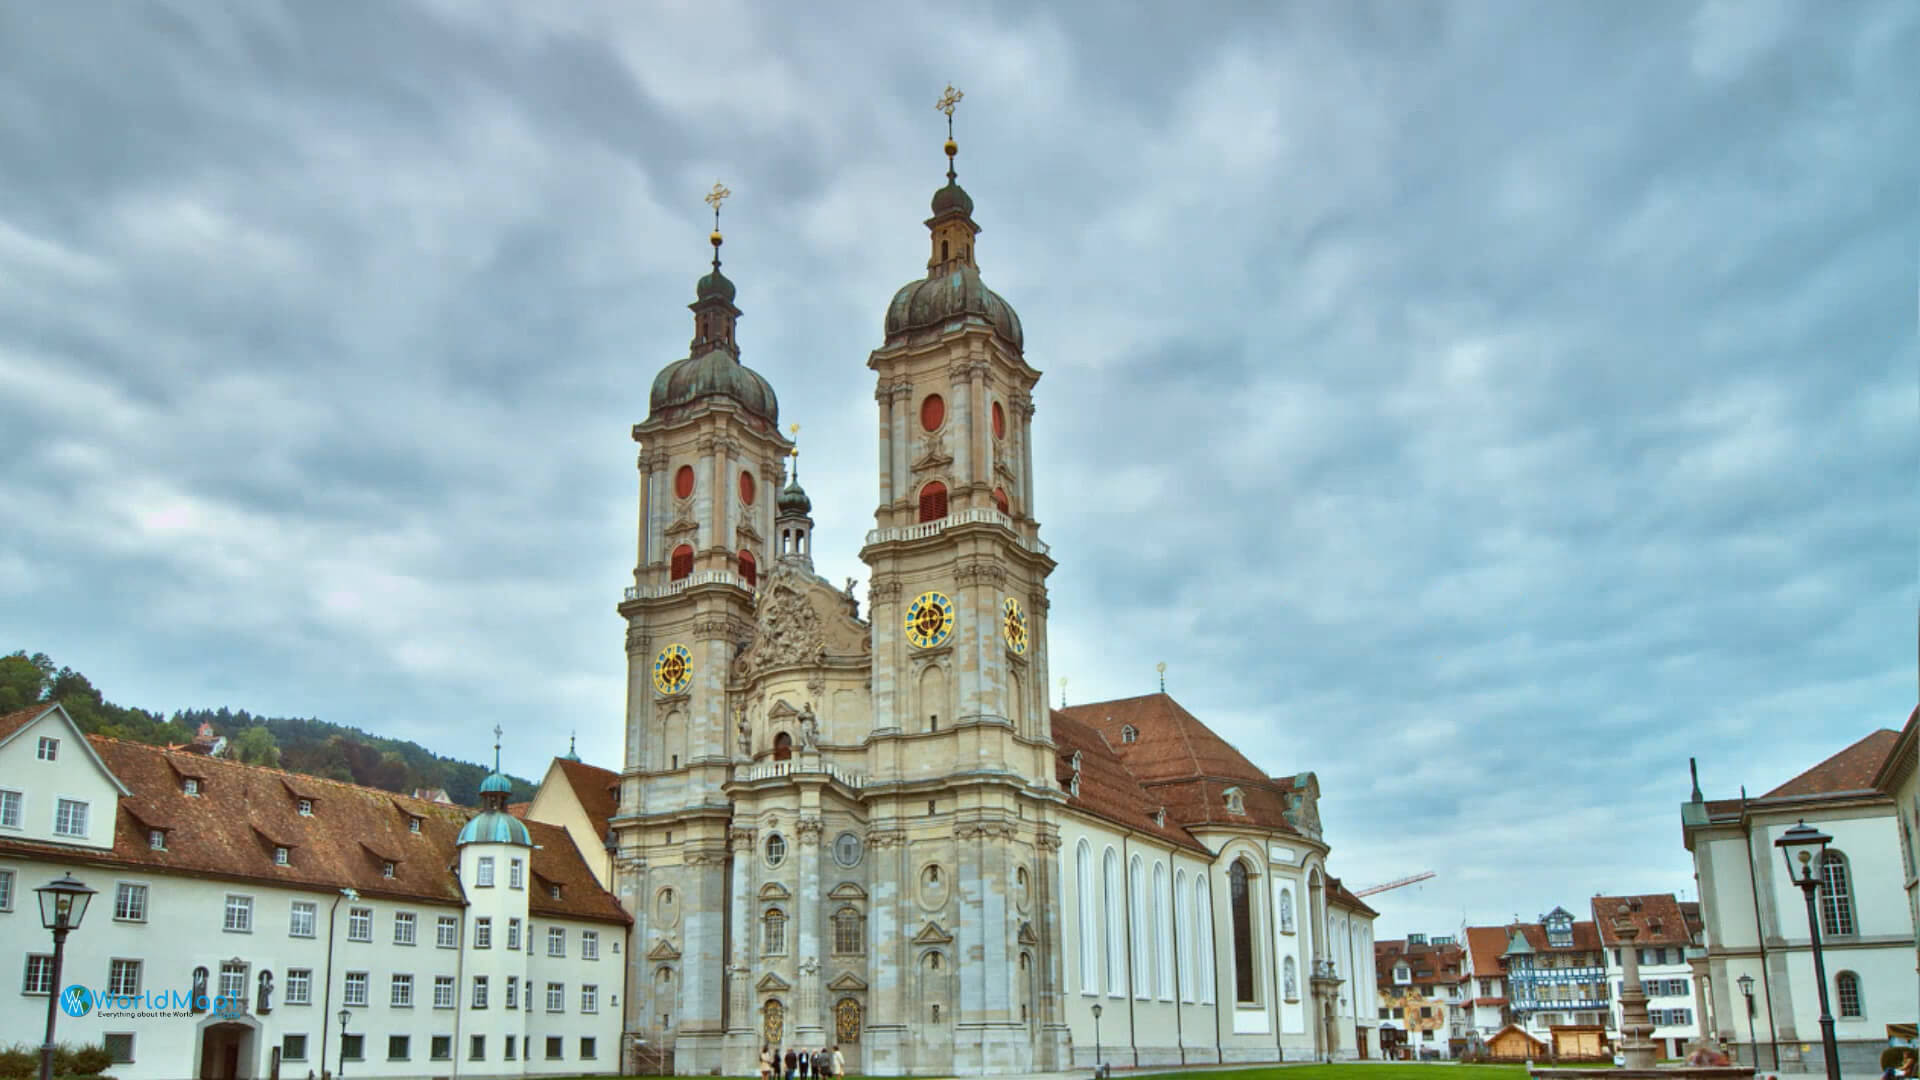 The Abbey Cathedral St. Gallen